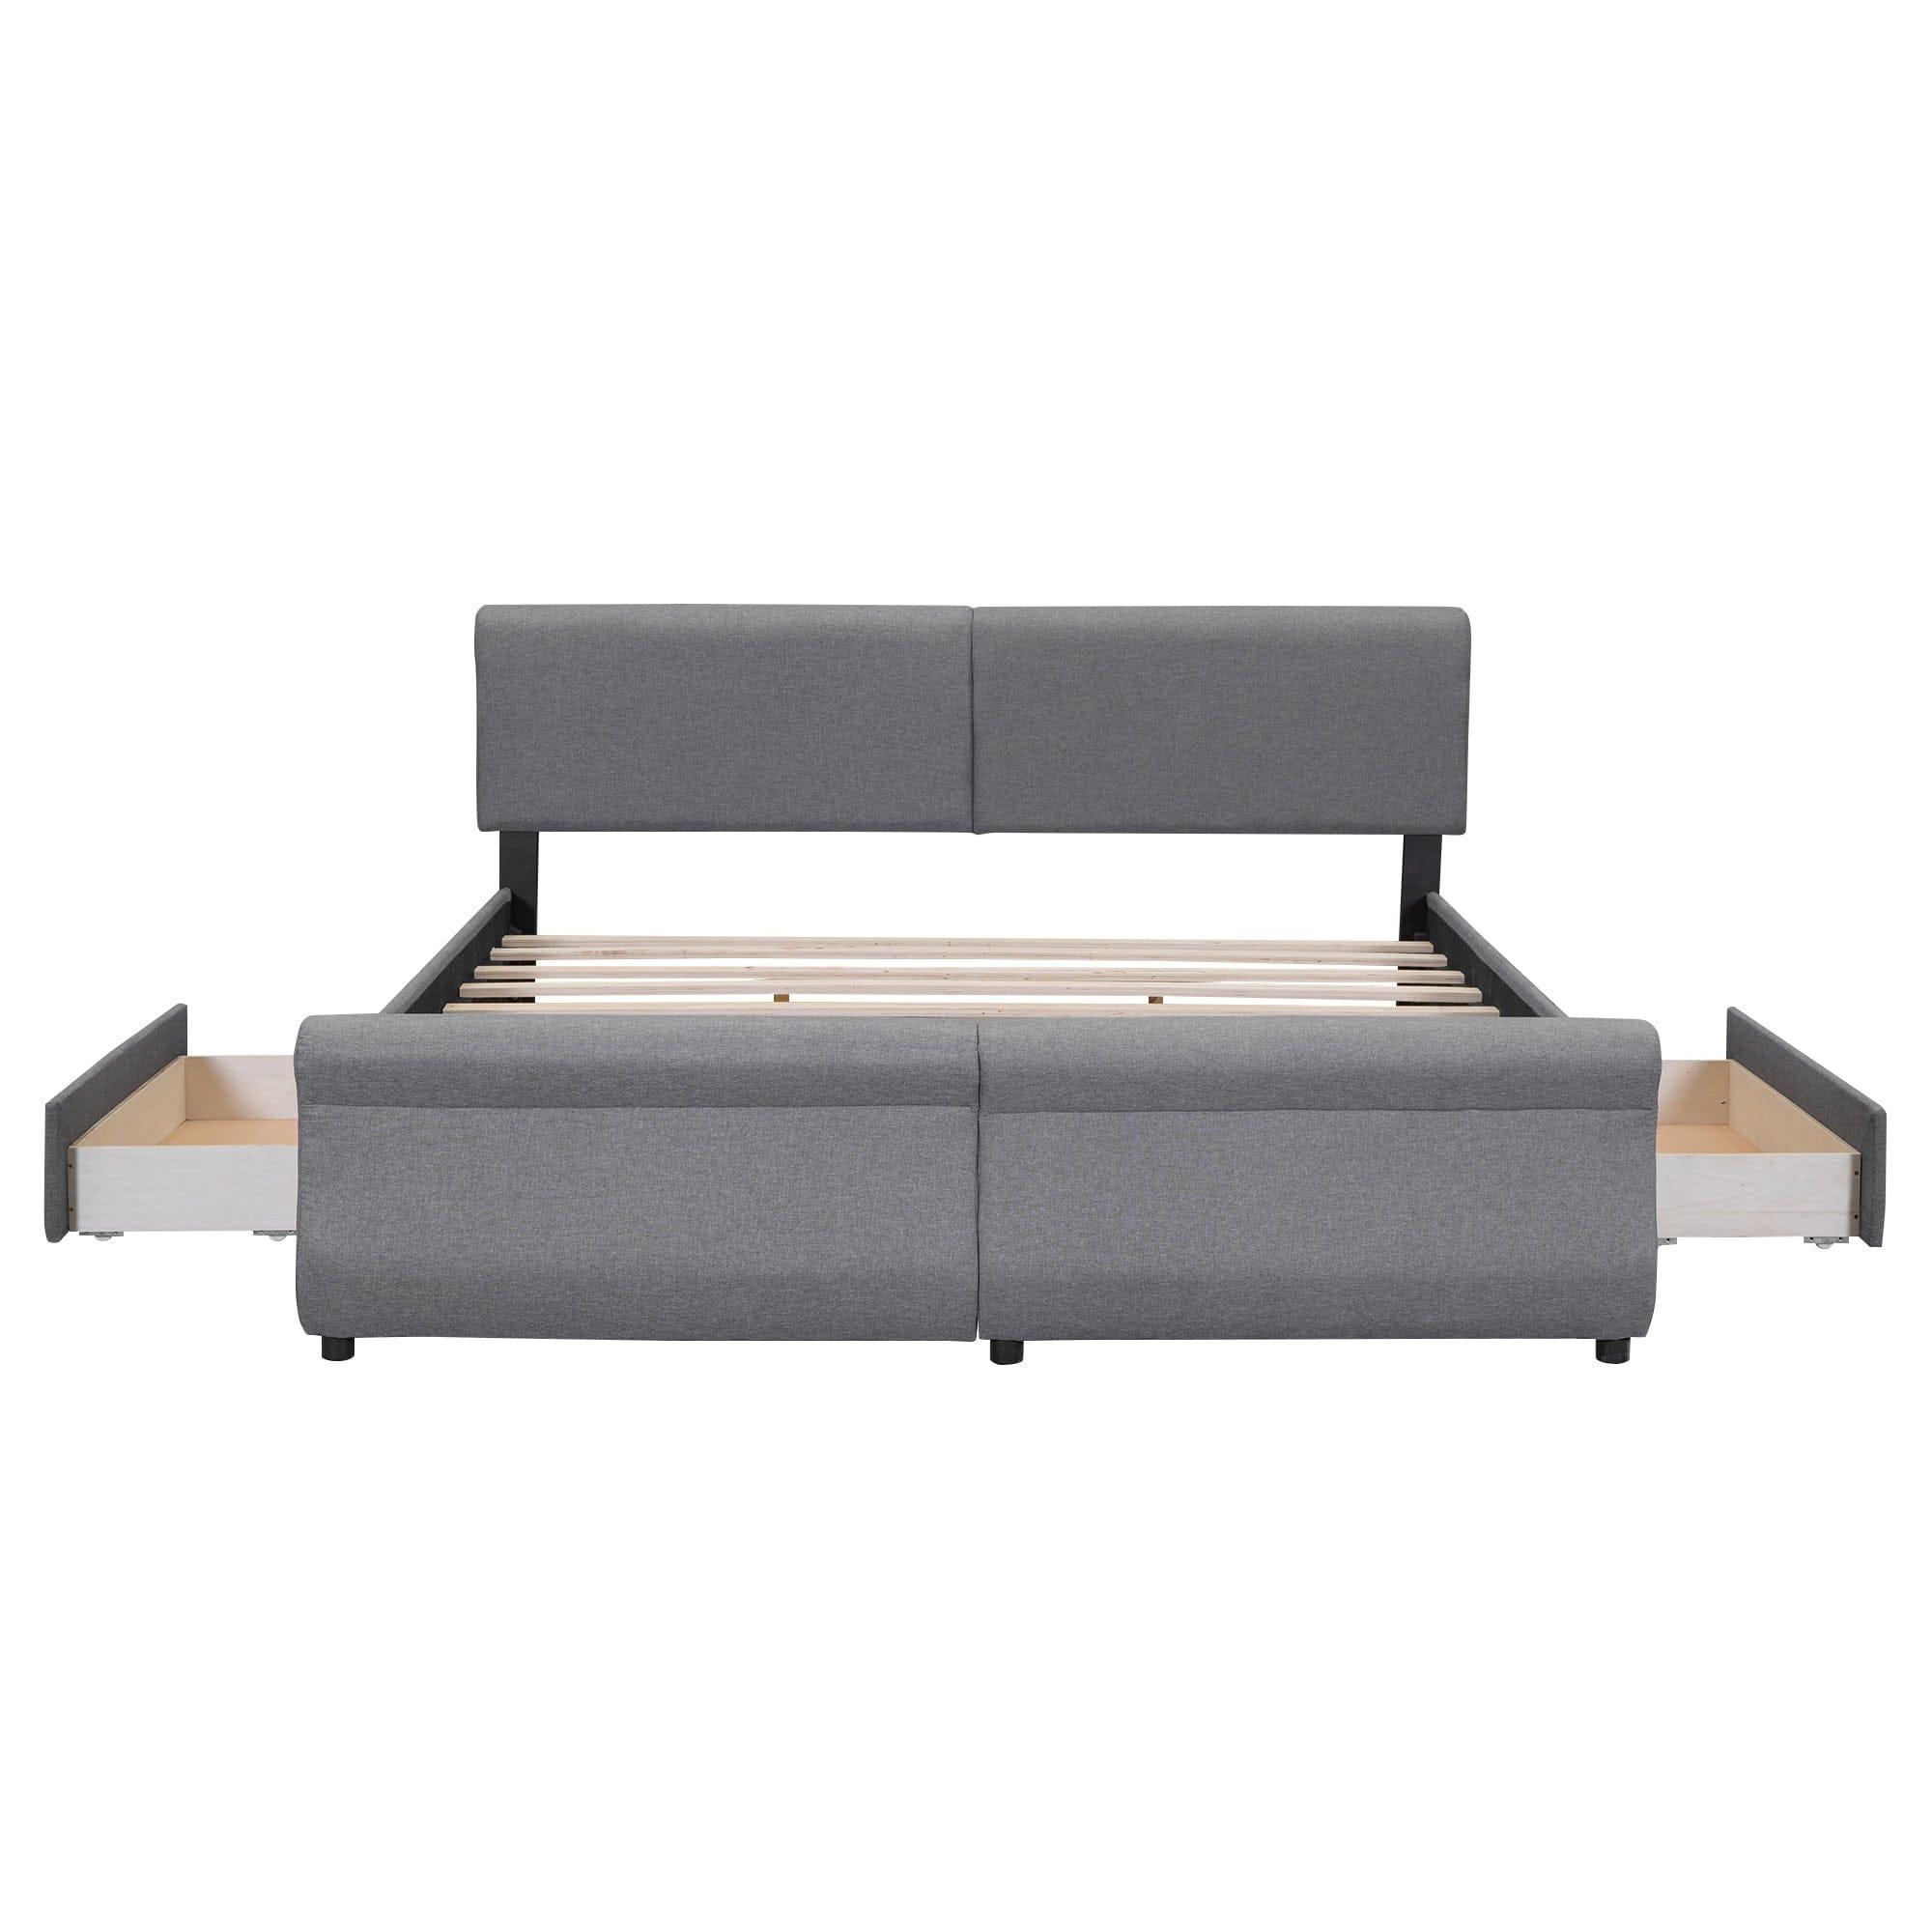 Shop King Size Upholstery Platform Bed with Two Drawers, Gray Mademoiselle Home Decor